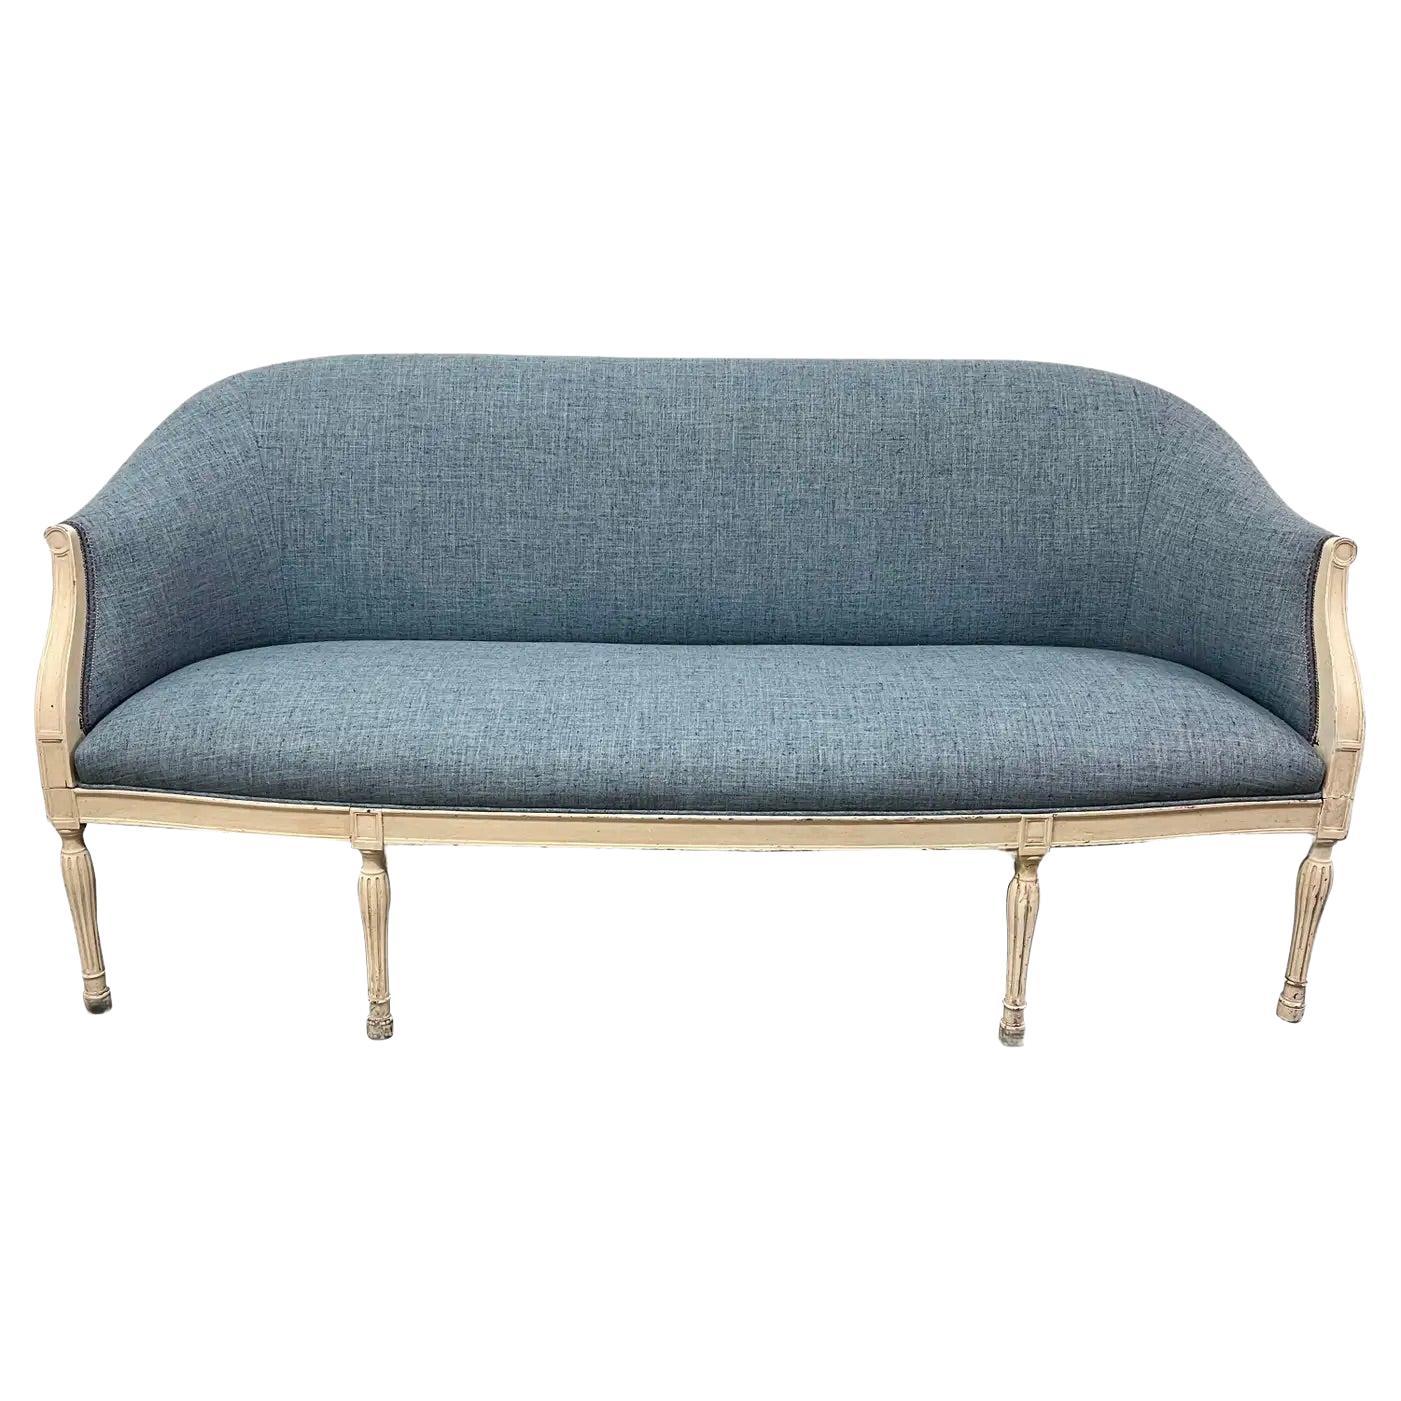 Upholstered Louis XVI Style Patinated Wood Frame Sofa 